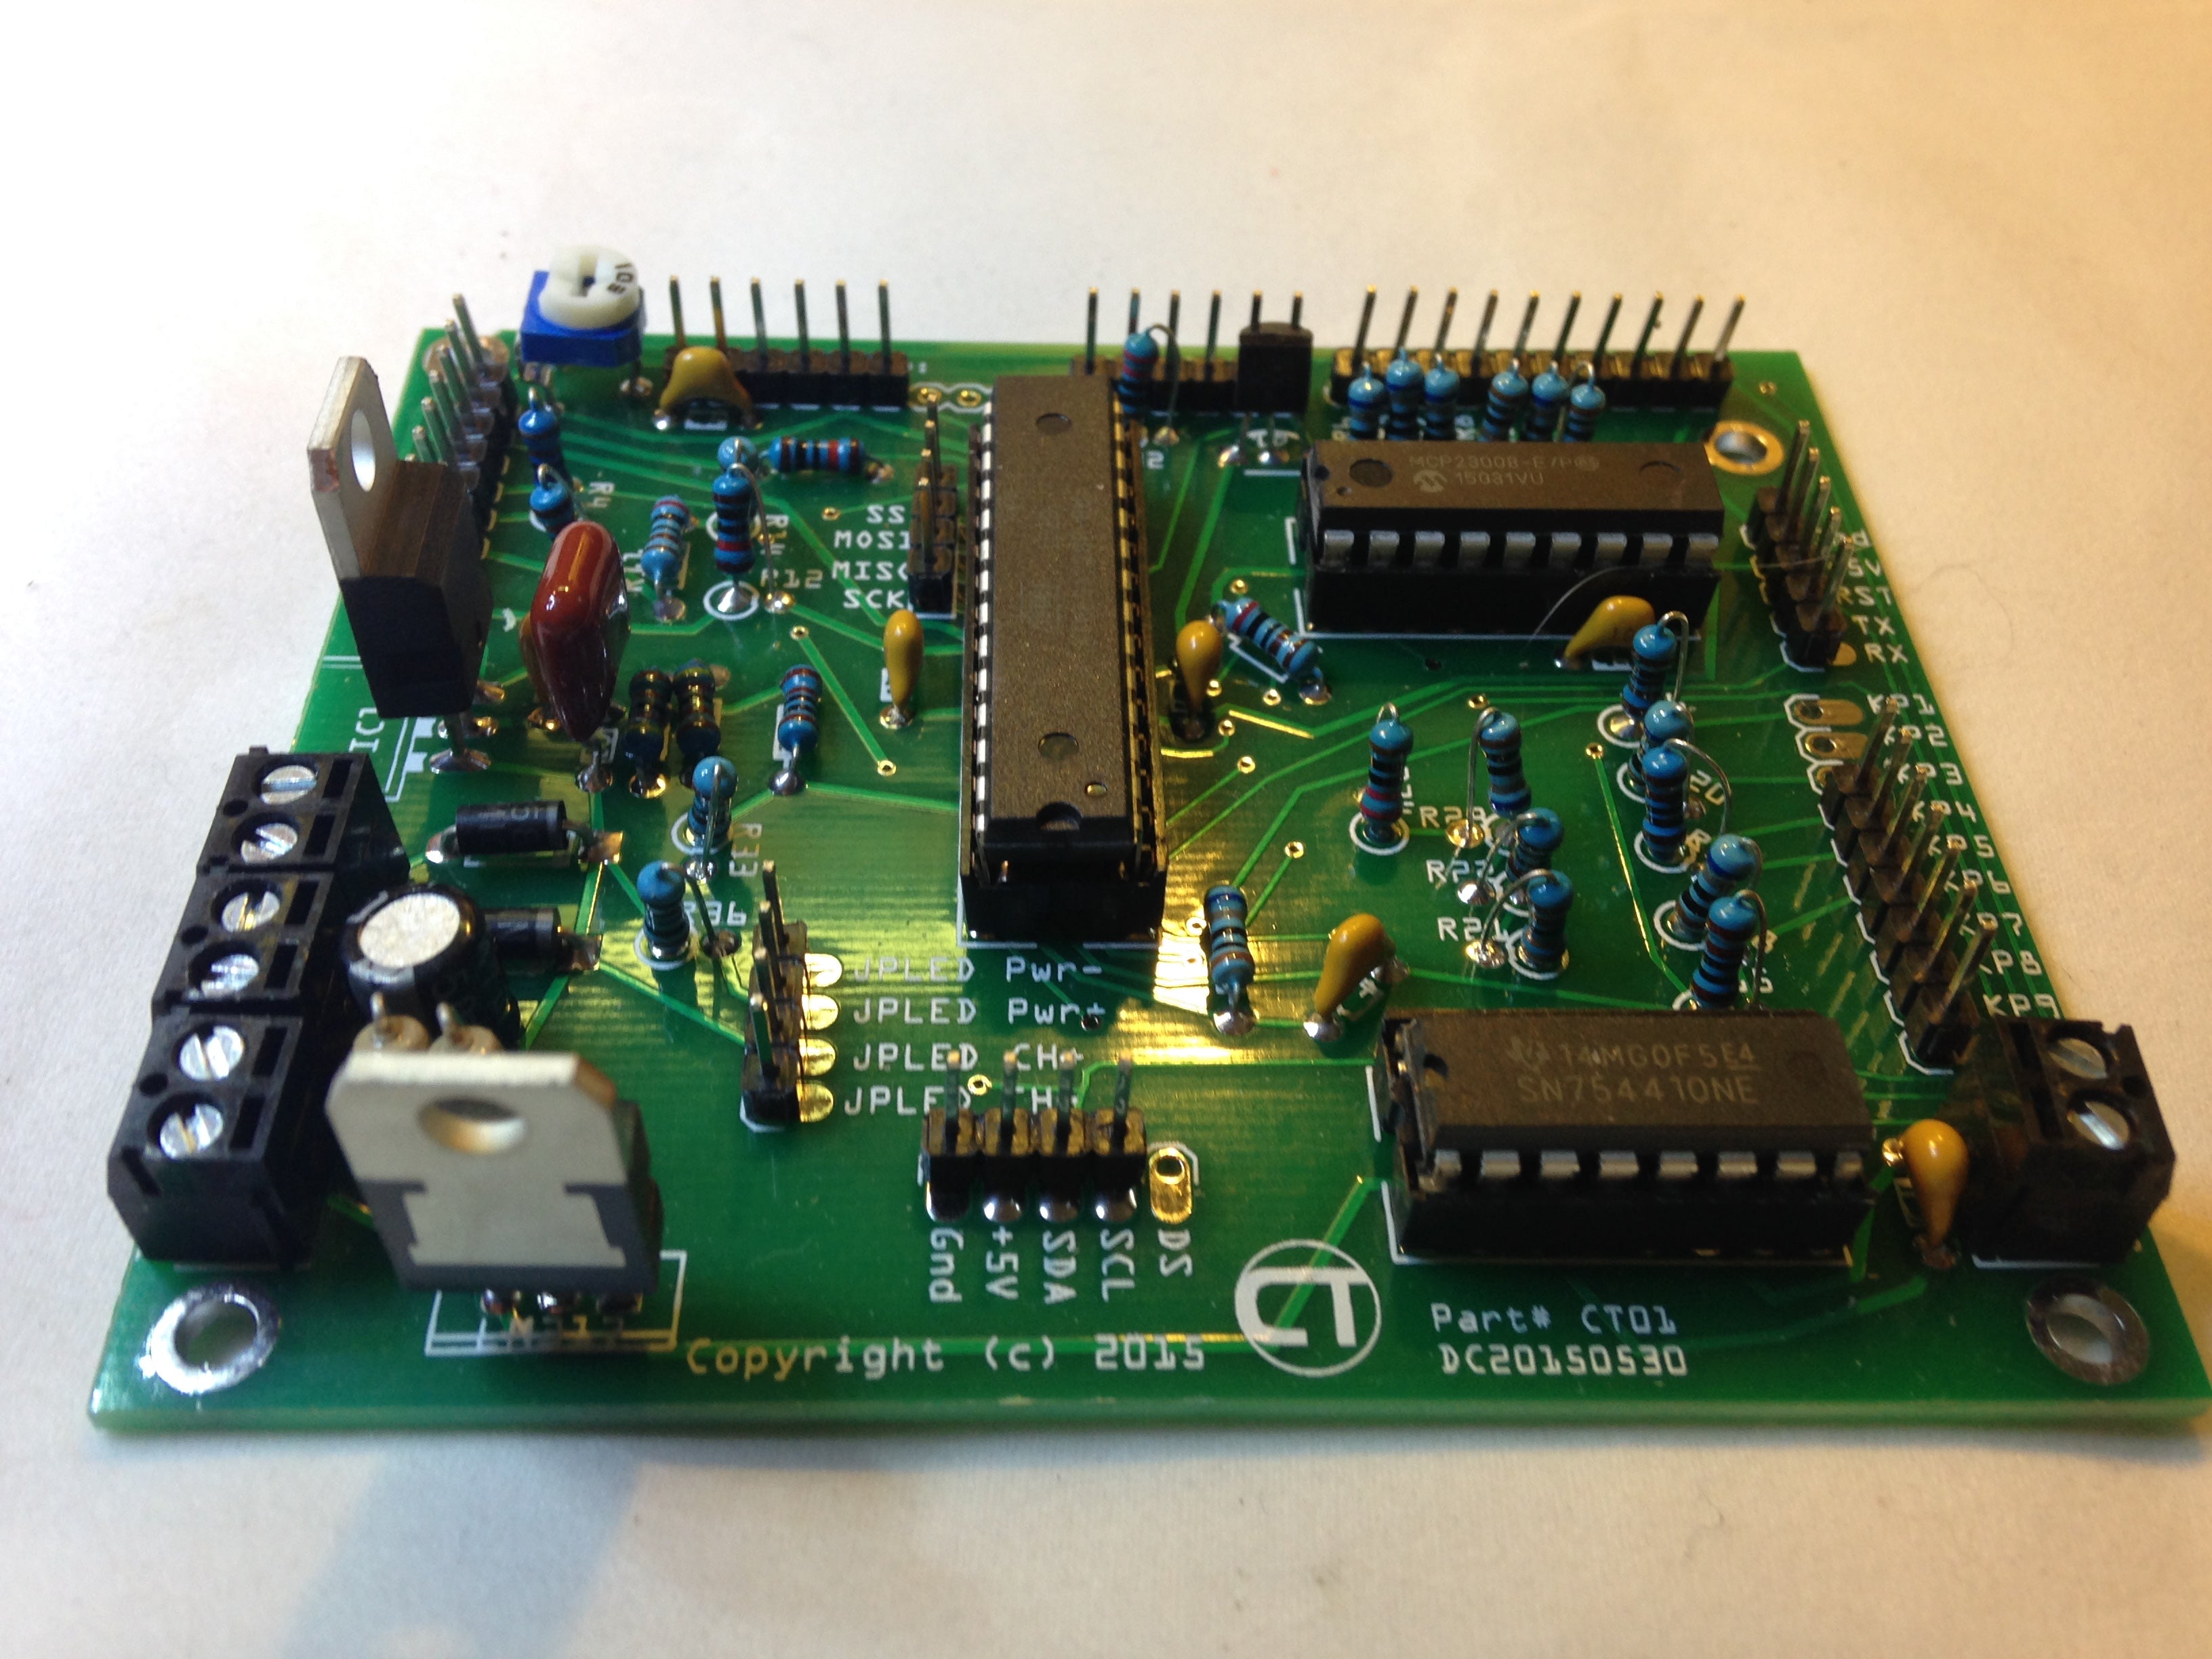 Automatic chicken door controller circuit board with through-hole (THT) parts.